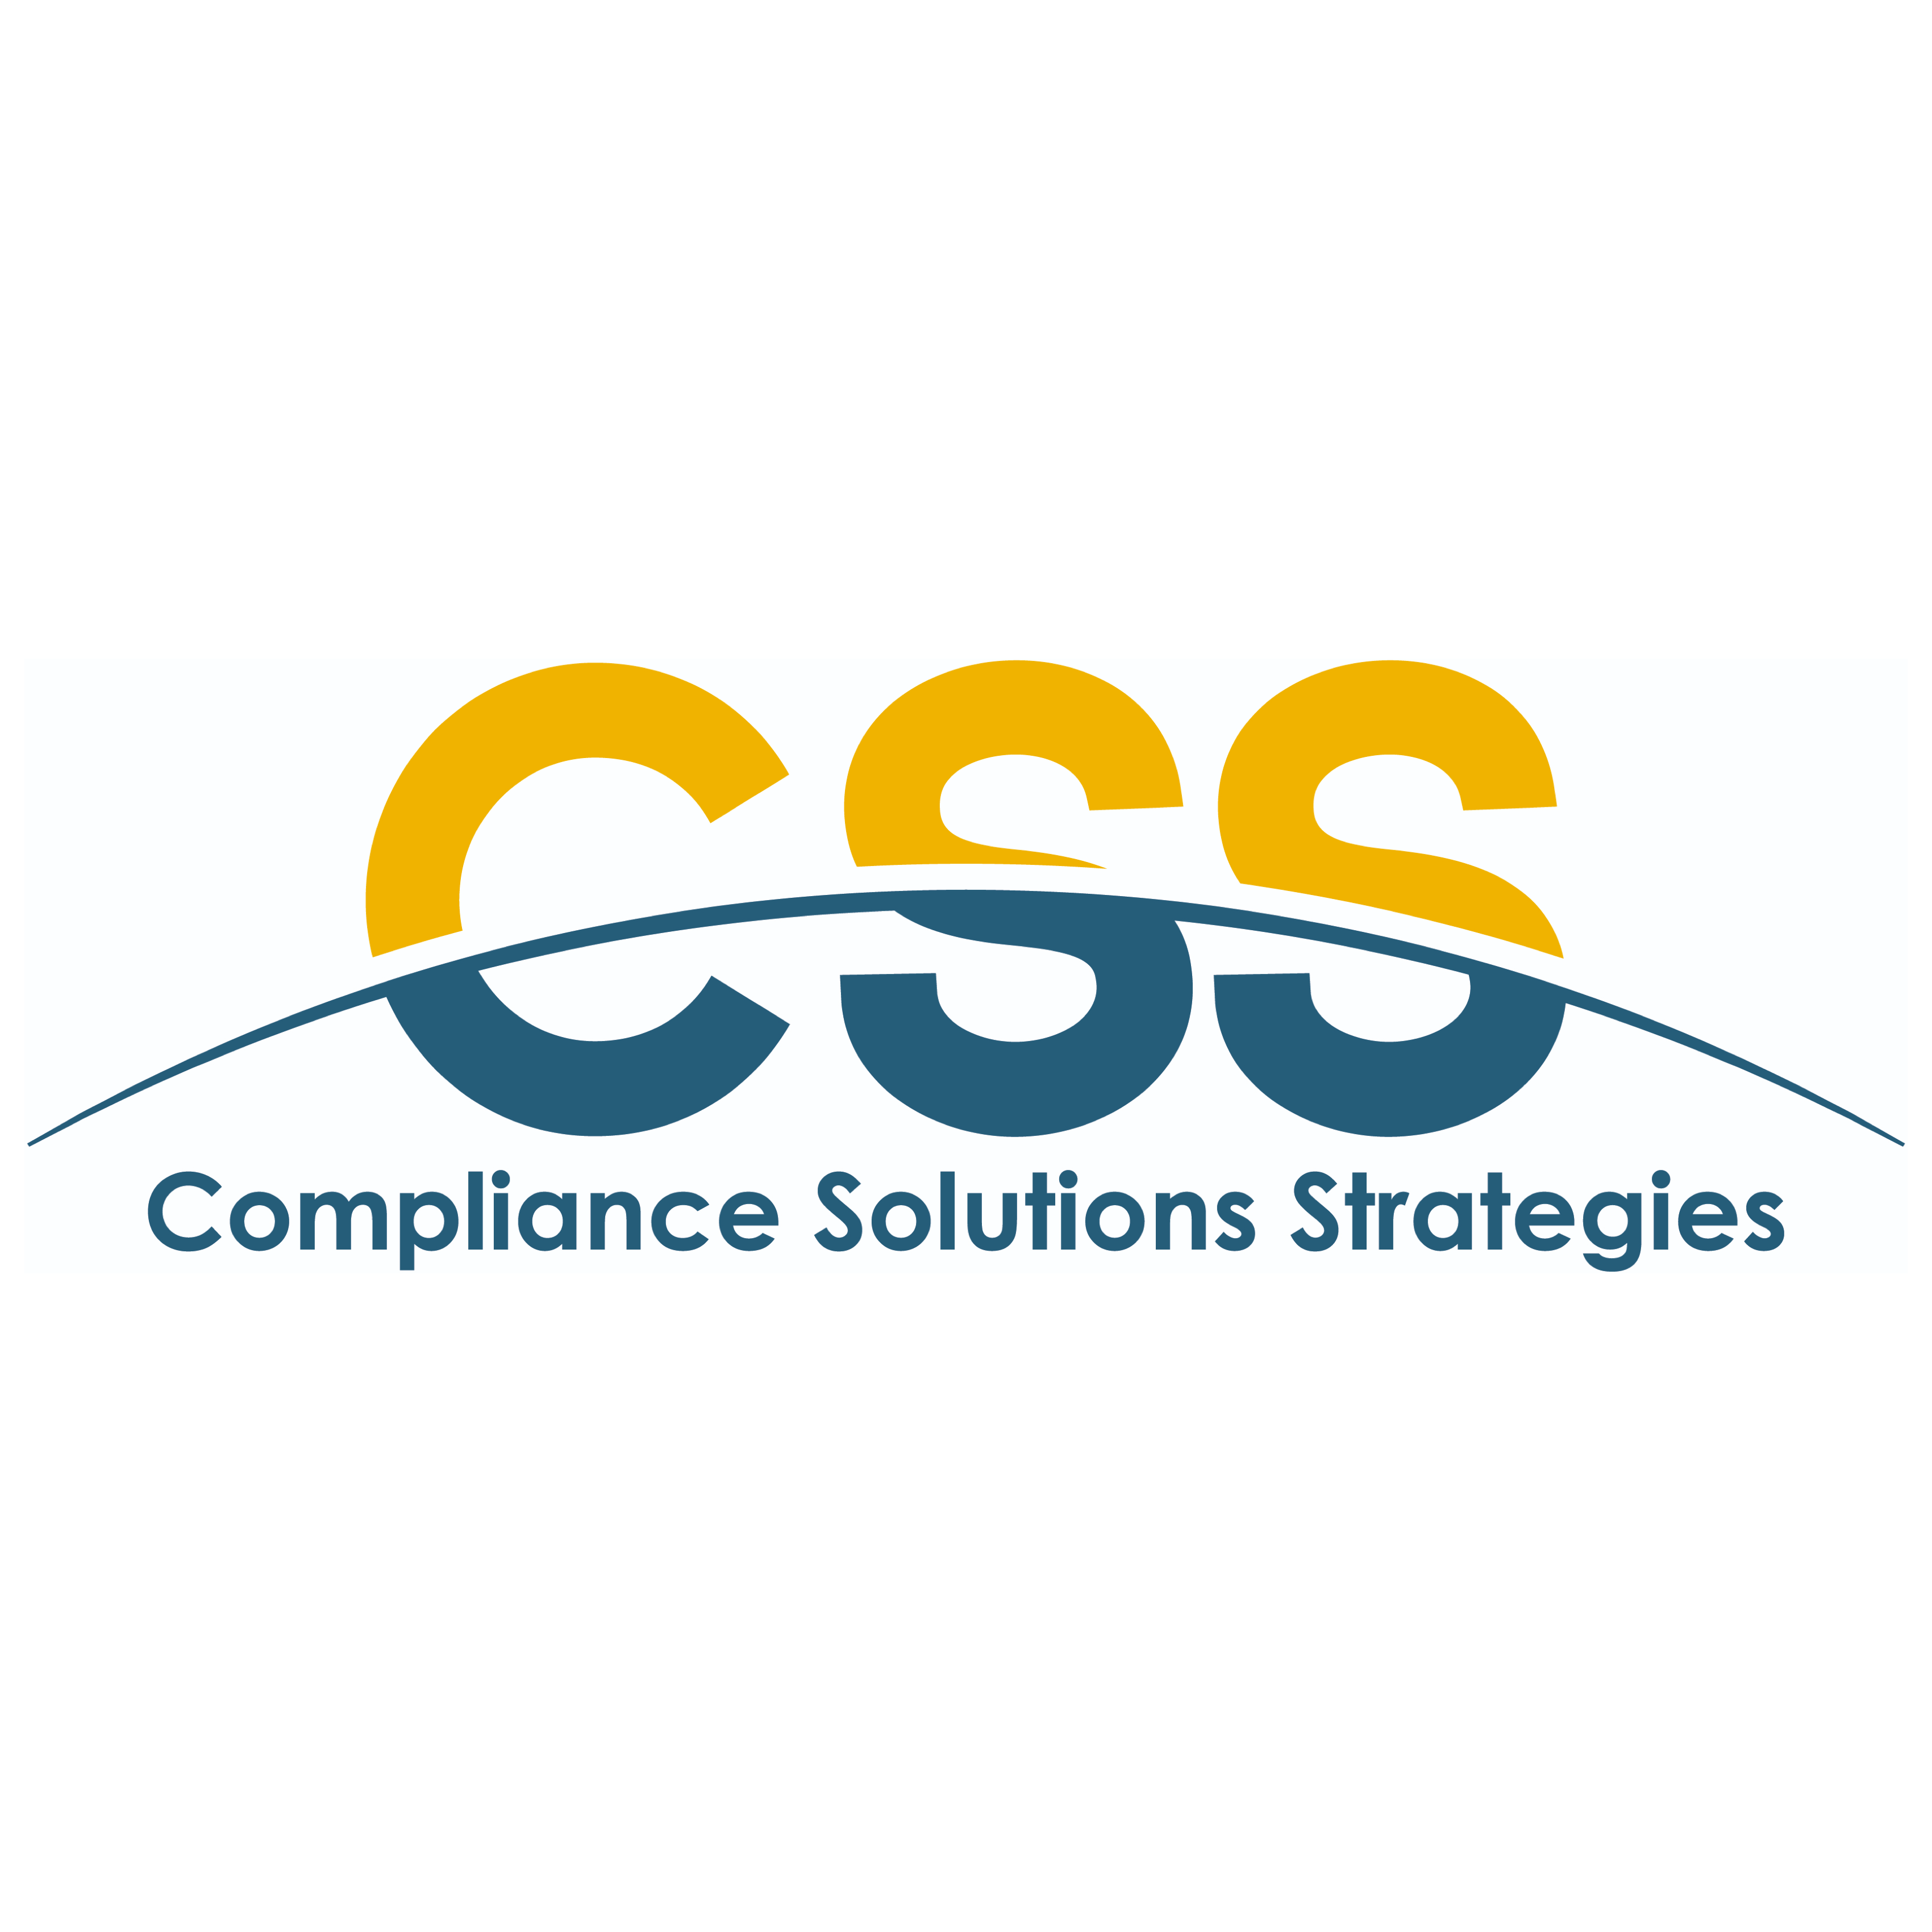 Compliance Solutions Strategies